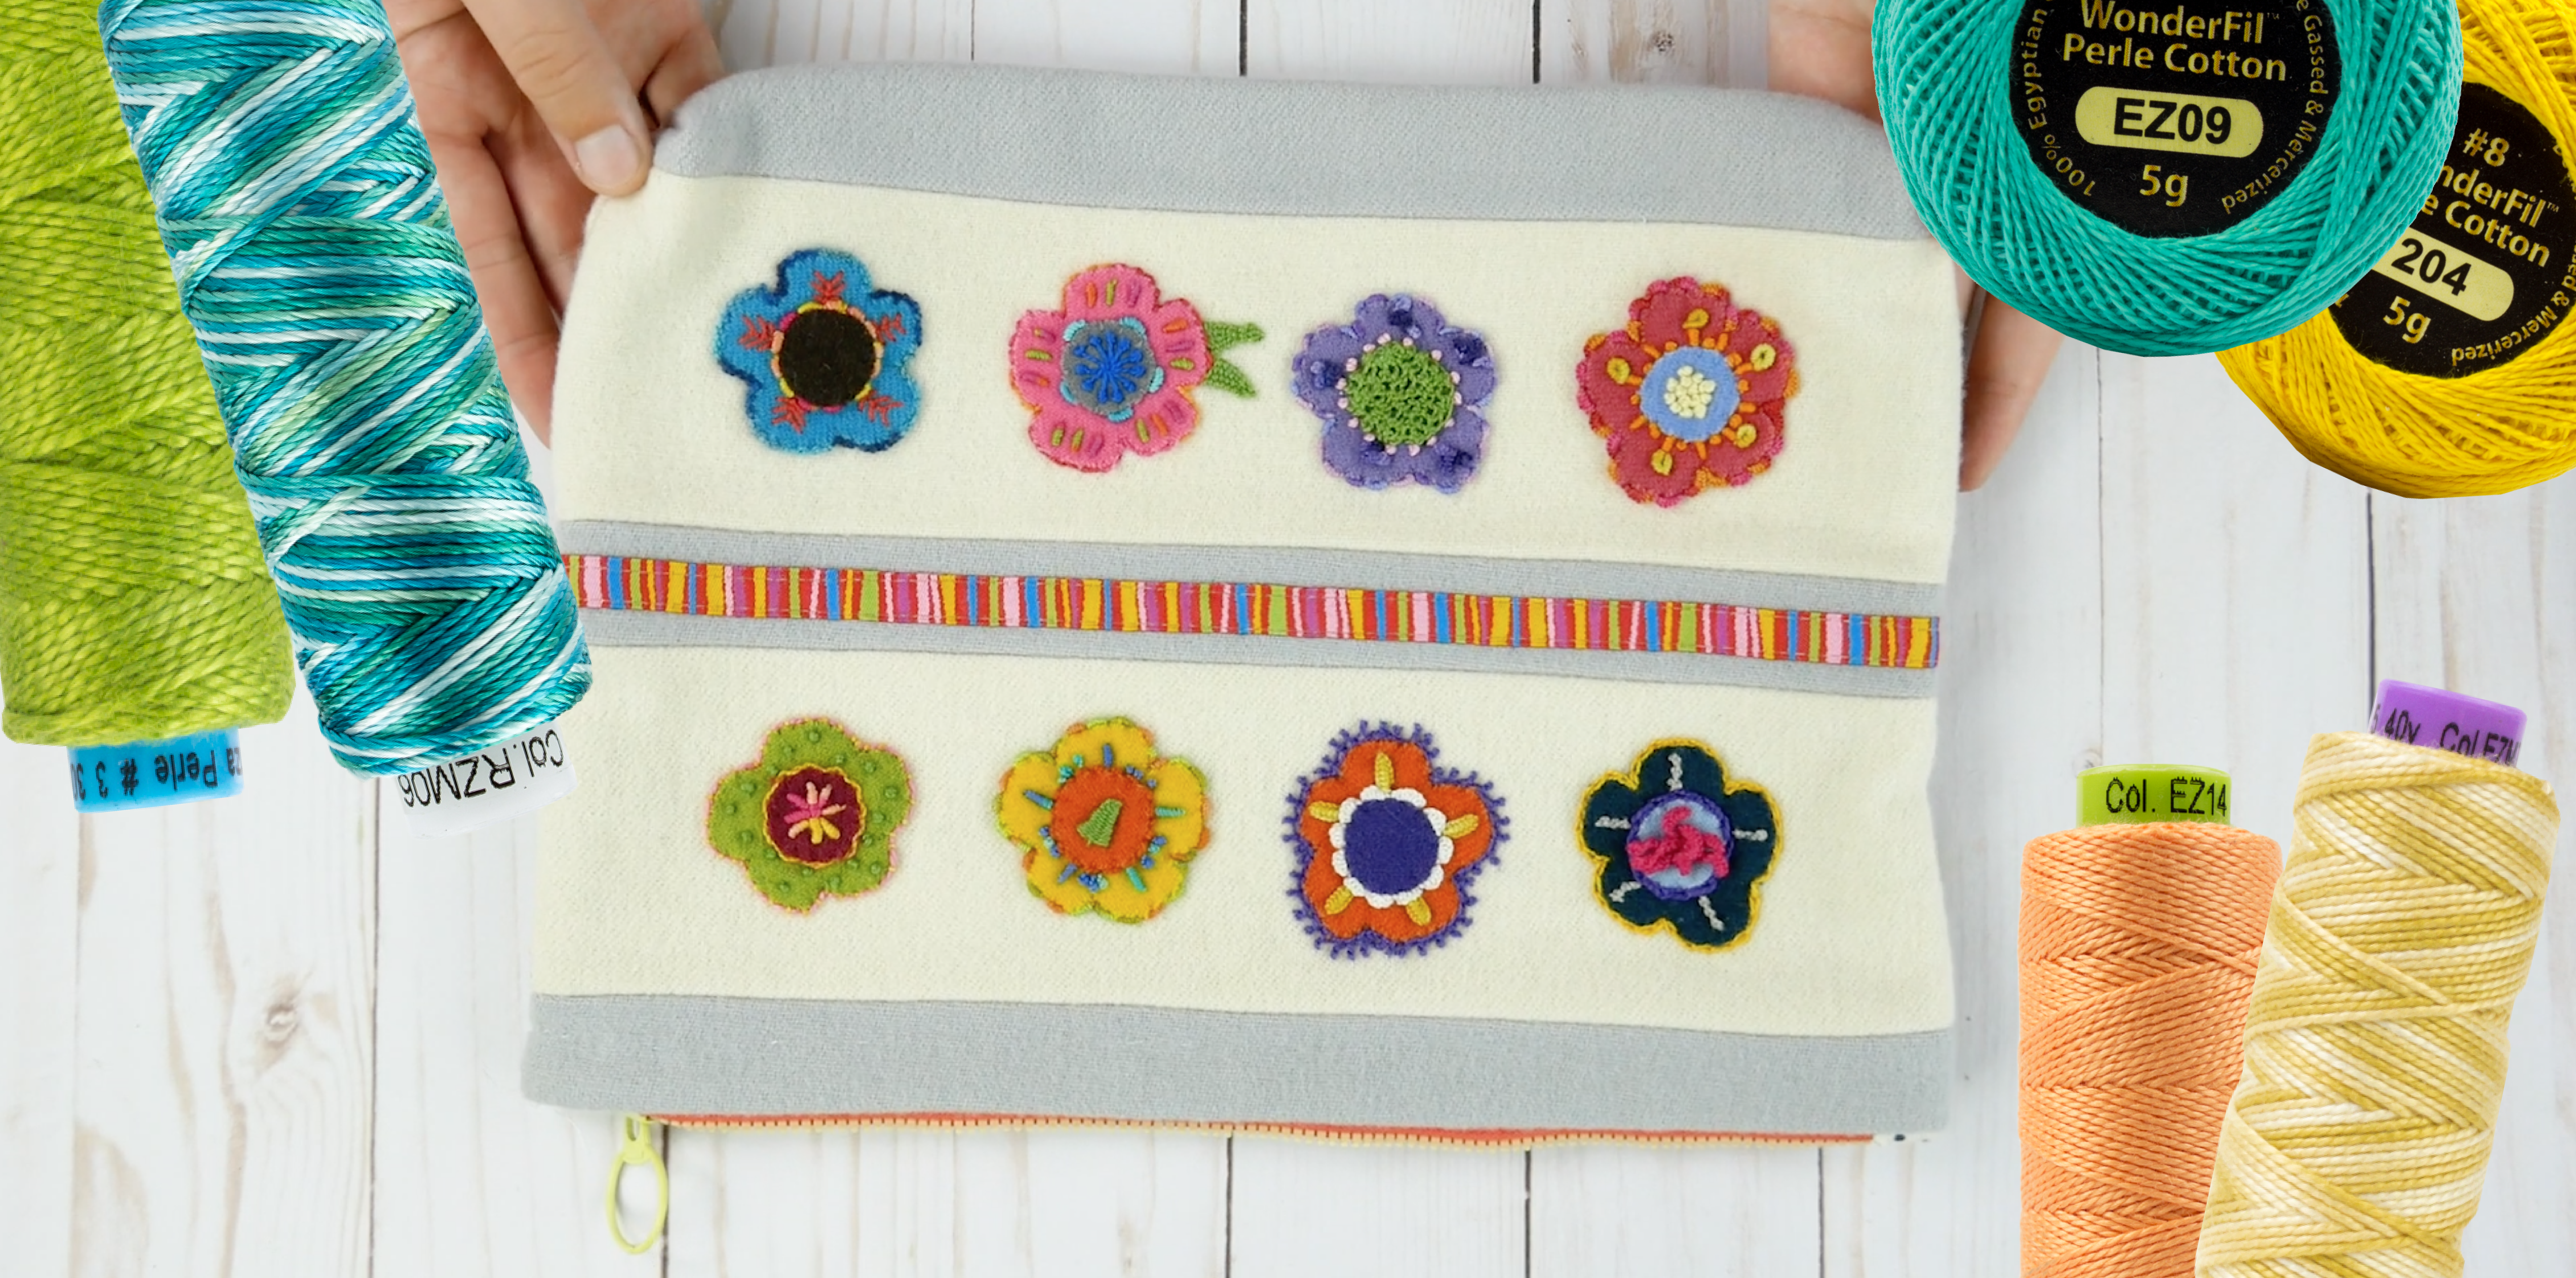 a hand embroidered pouch with spools of various hand embroidery threads